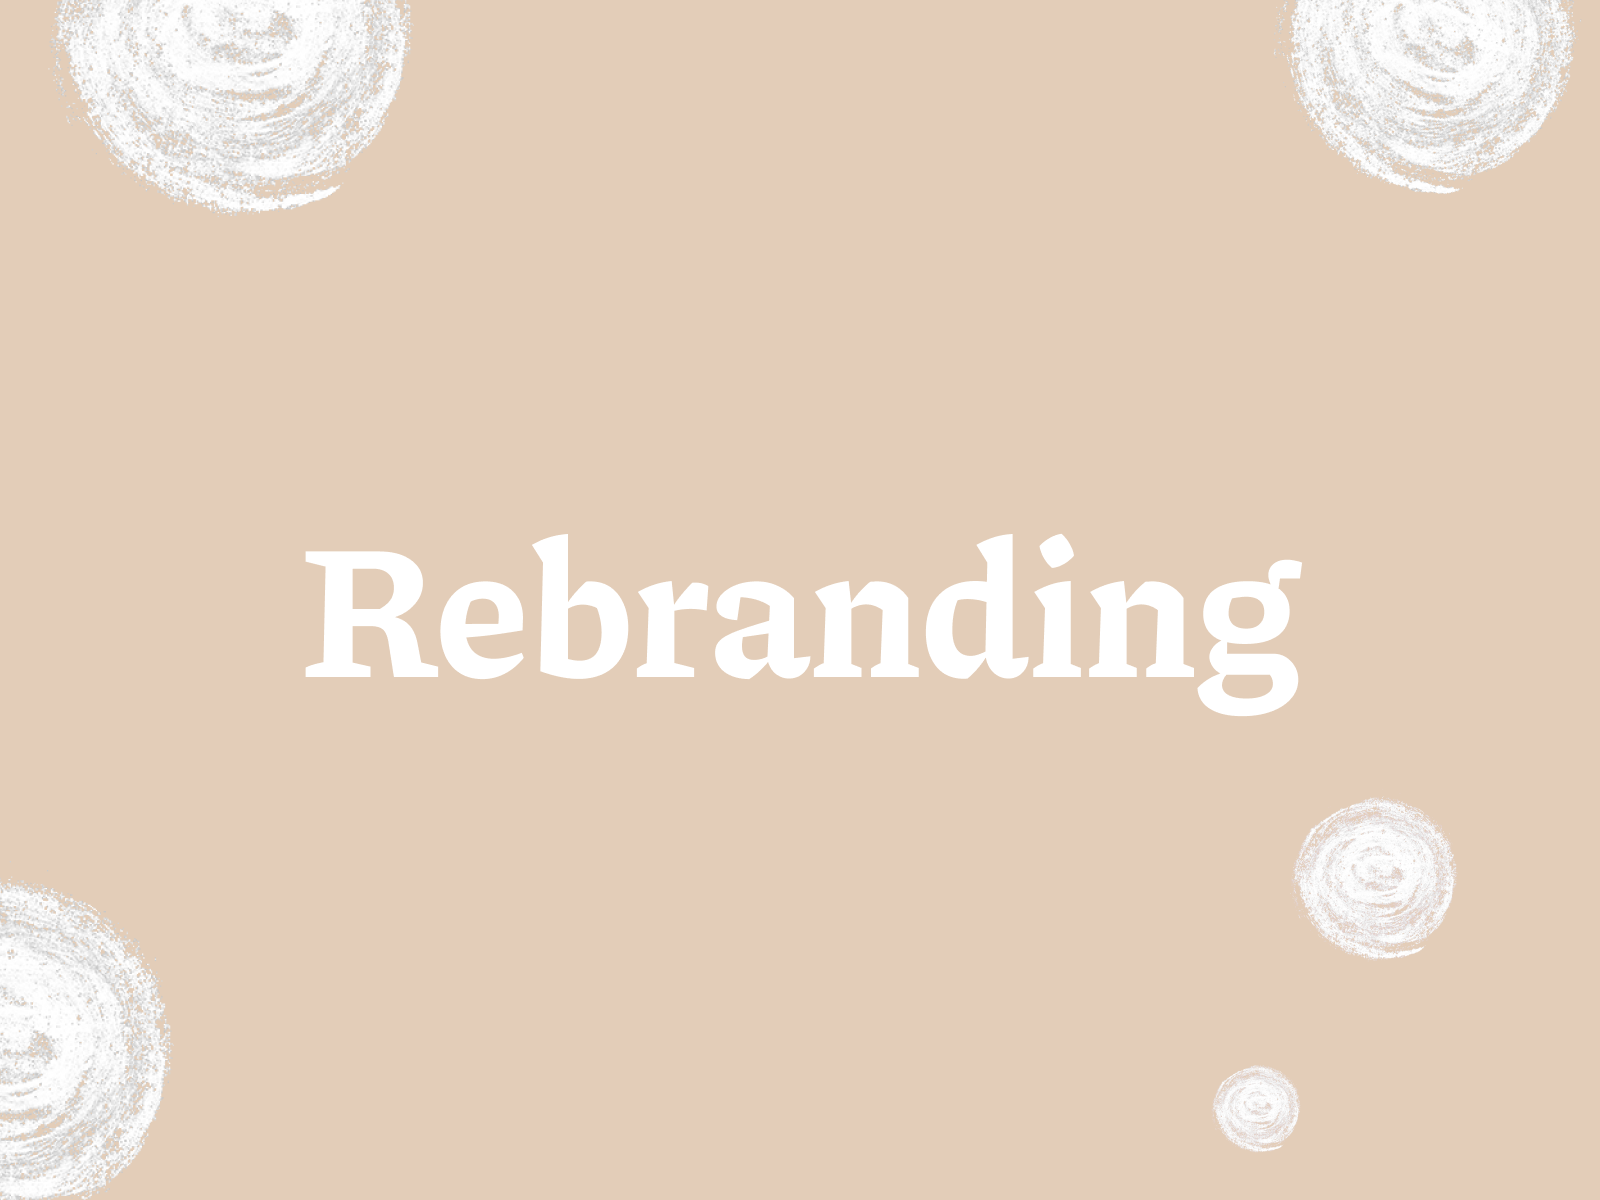 Why is proper rebranding important?